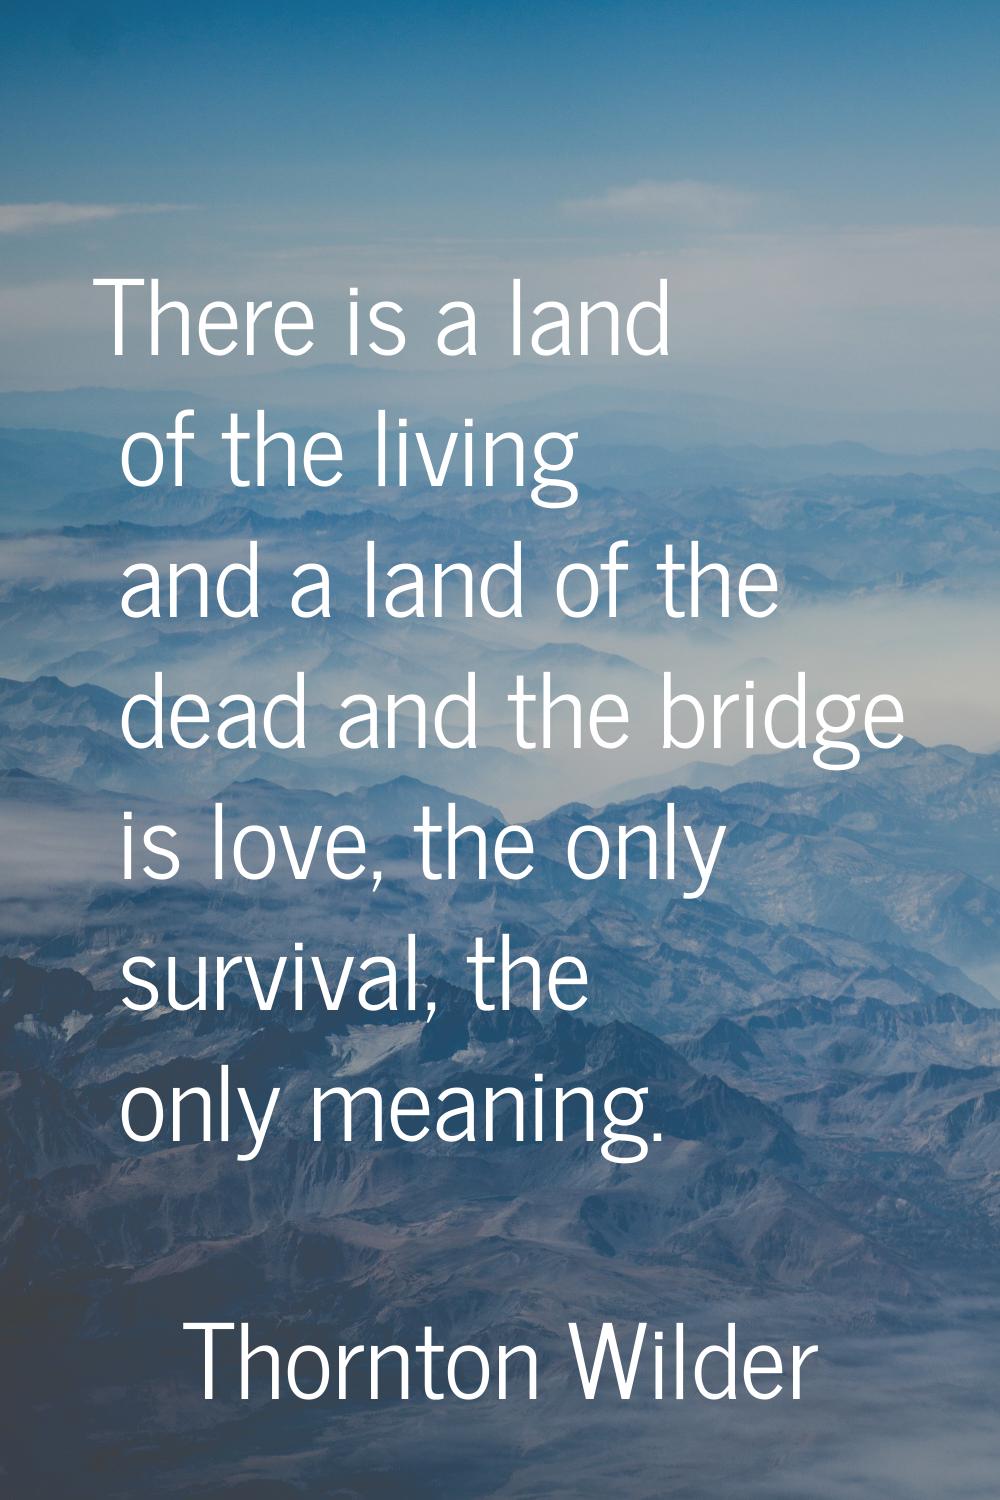 There is a land of the living and a land of the dead and the bridge is love, the only survival, the